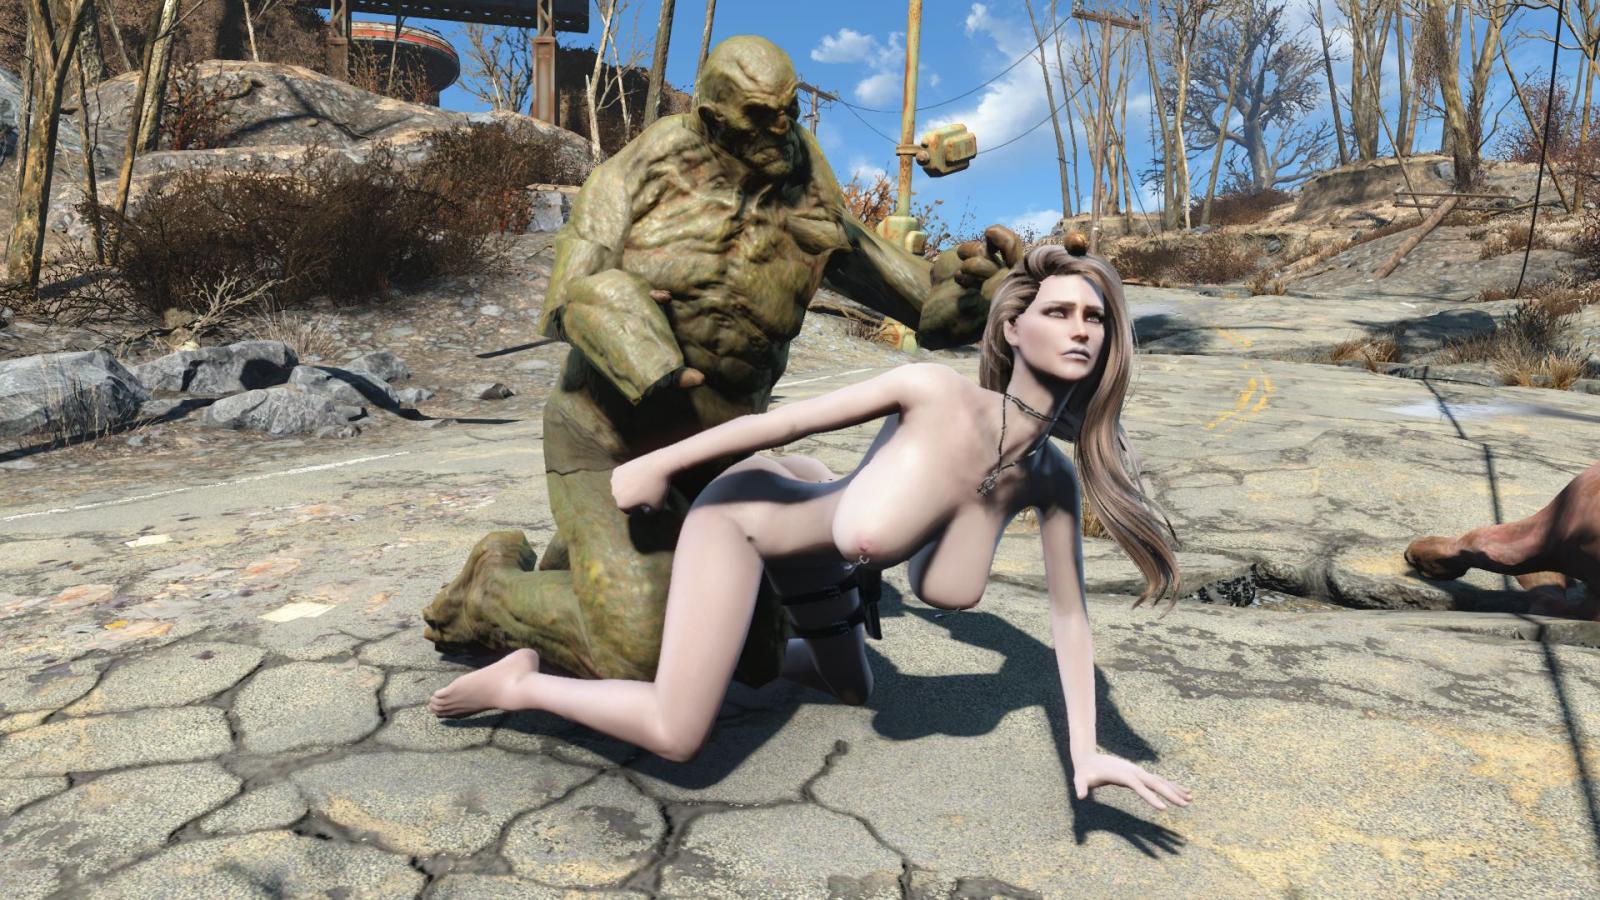 [aaf] Fo4 Animations By Leito 12 21 18 Page 9 Downloads Fallout 4 Adult And Sex Mods